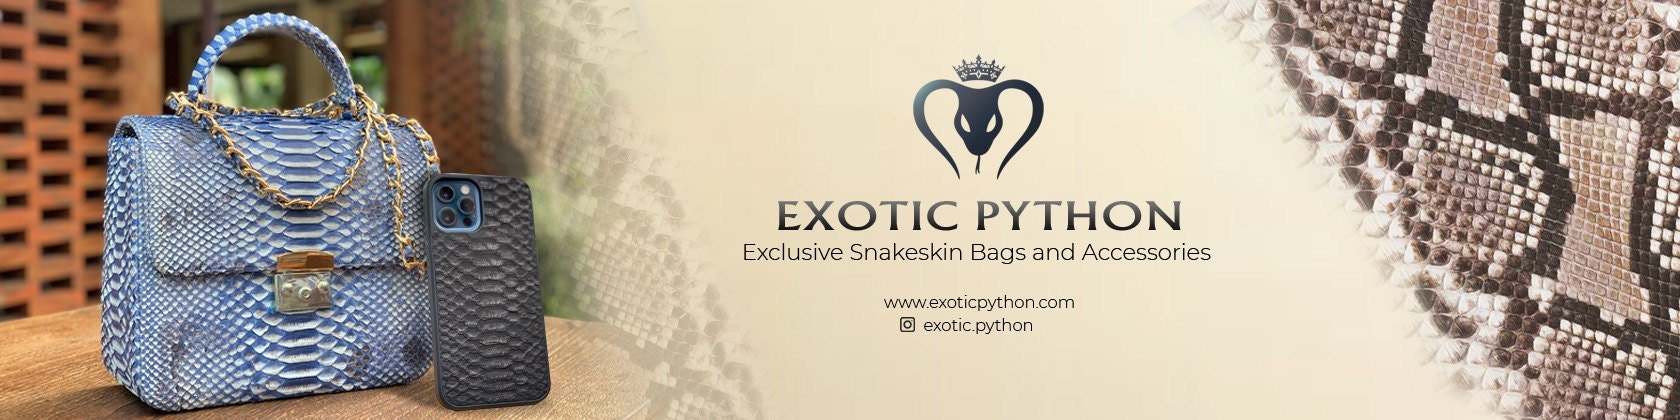 Unique gifts for women - Exotic Python